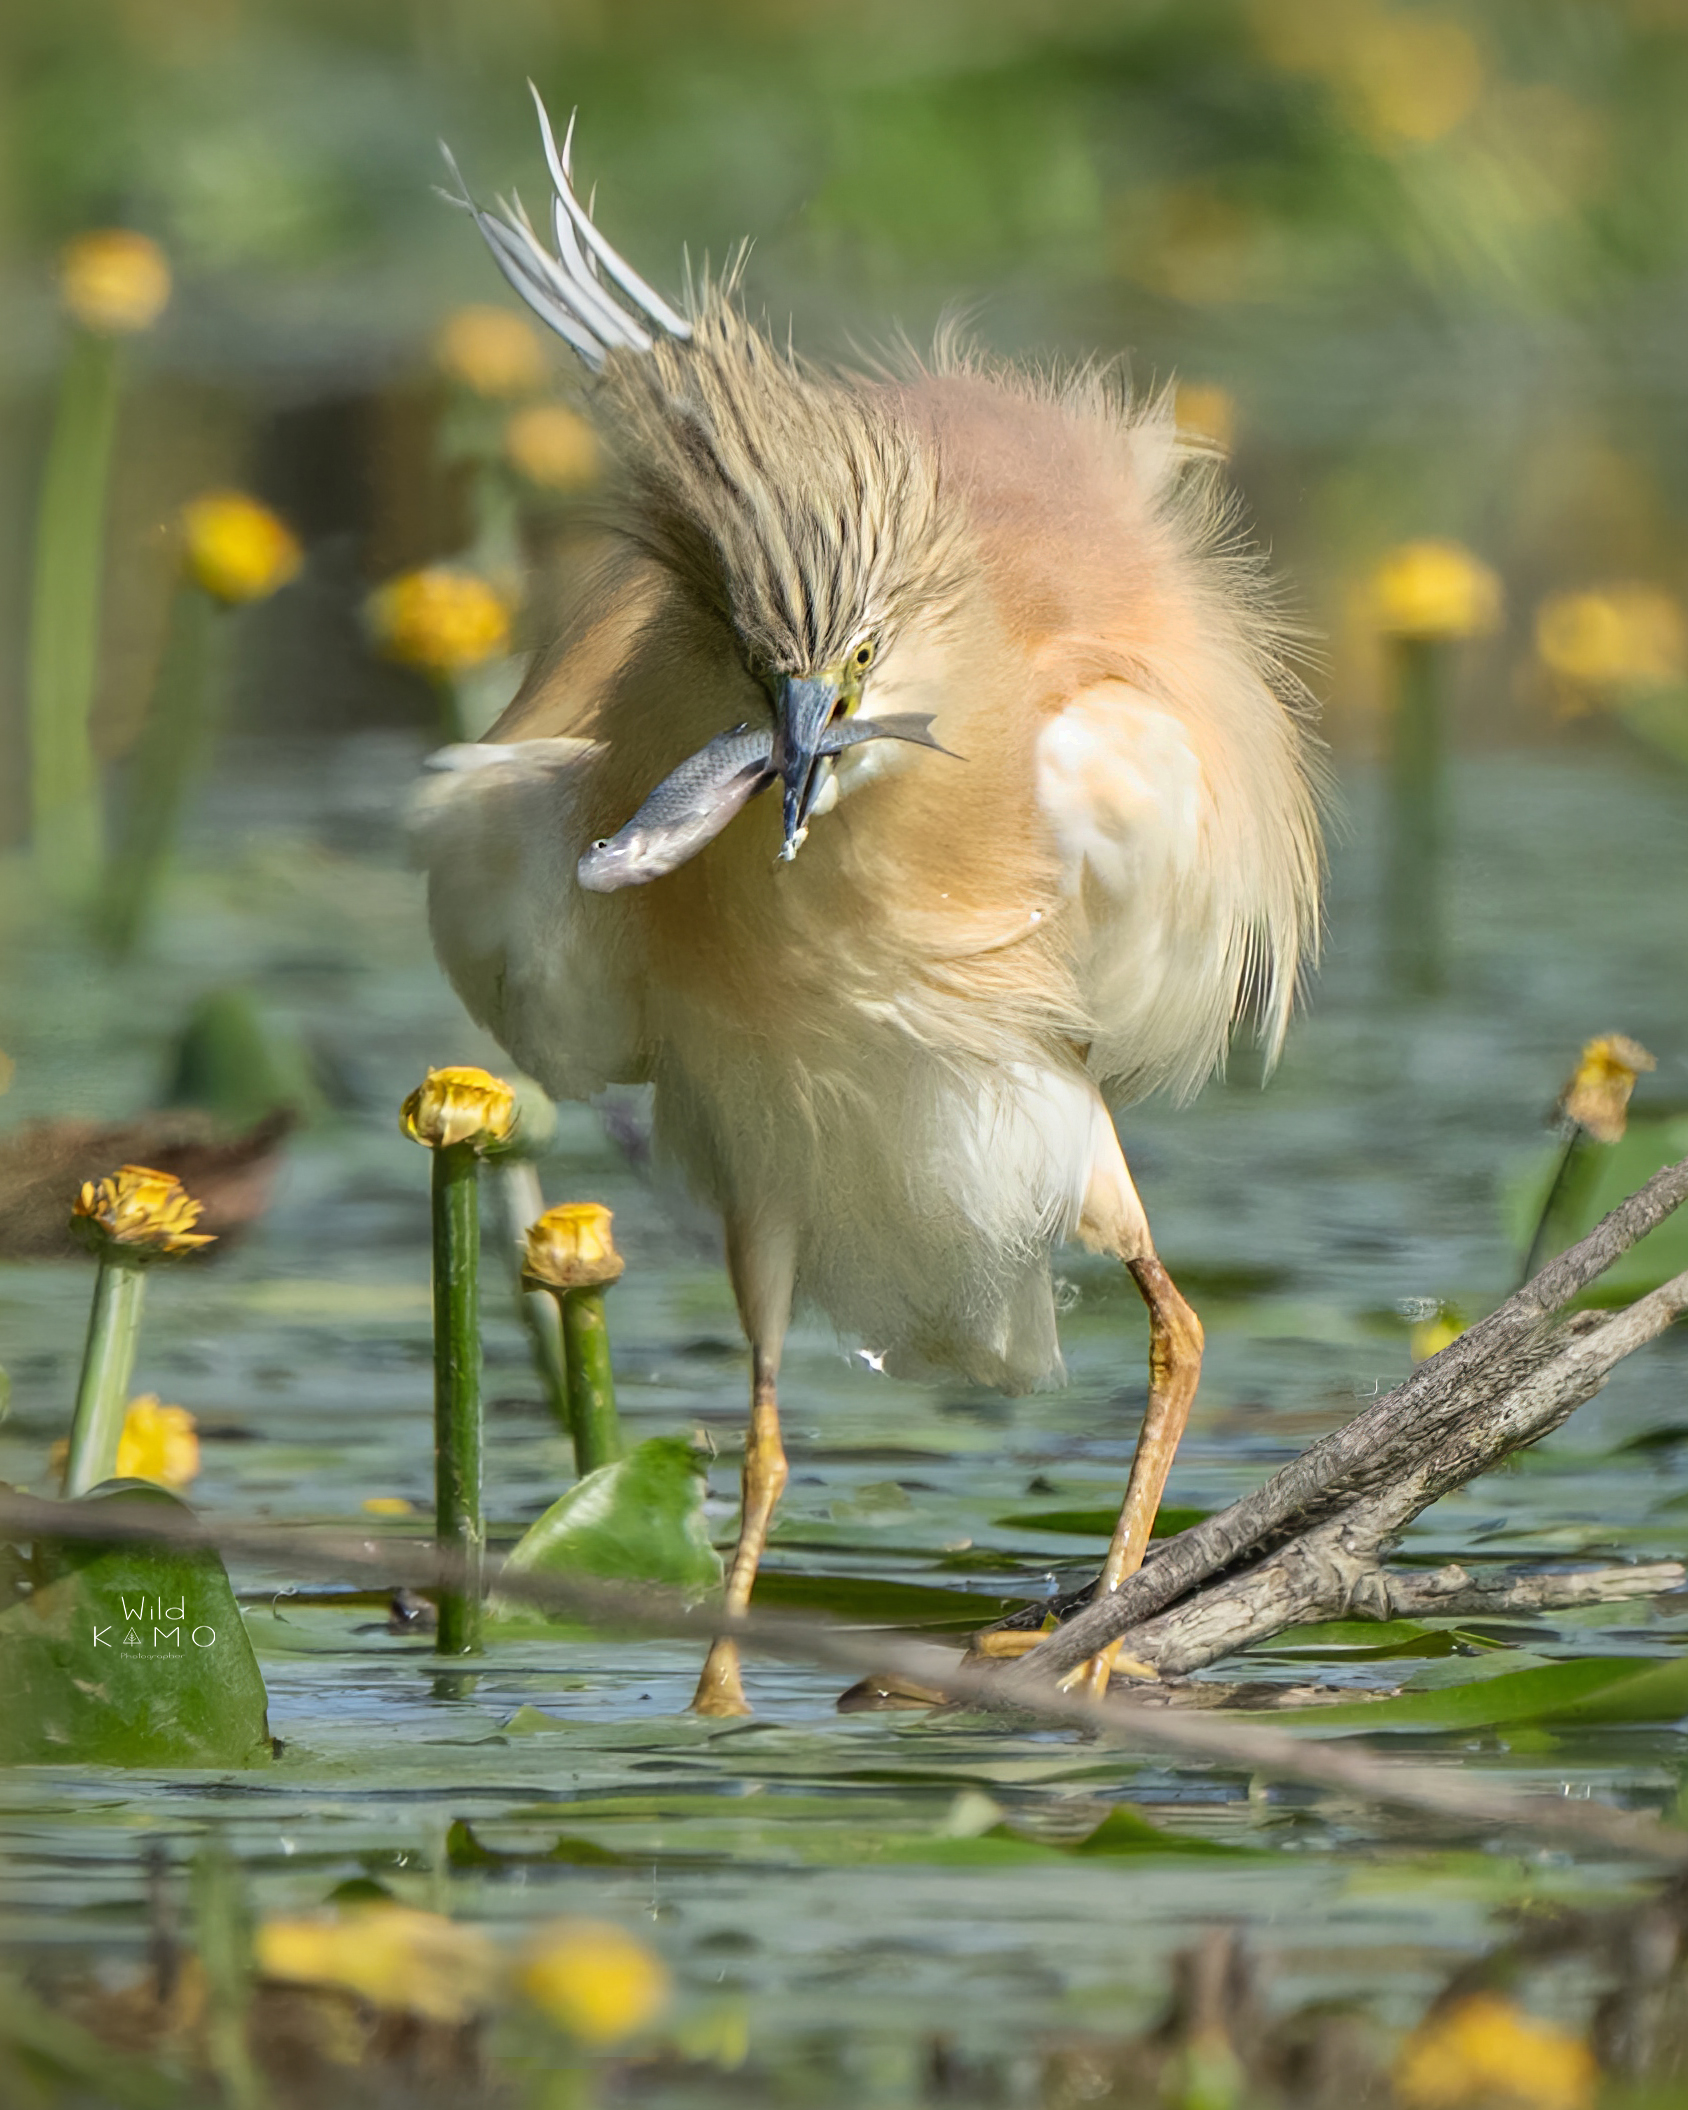 The cruelty of the Tufted Heron ...